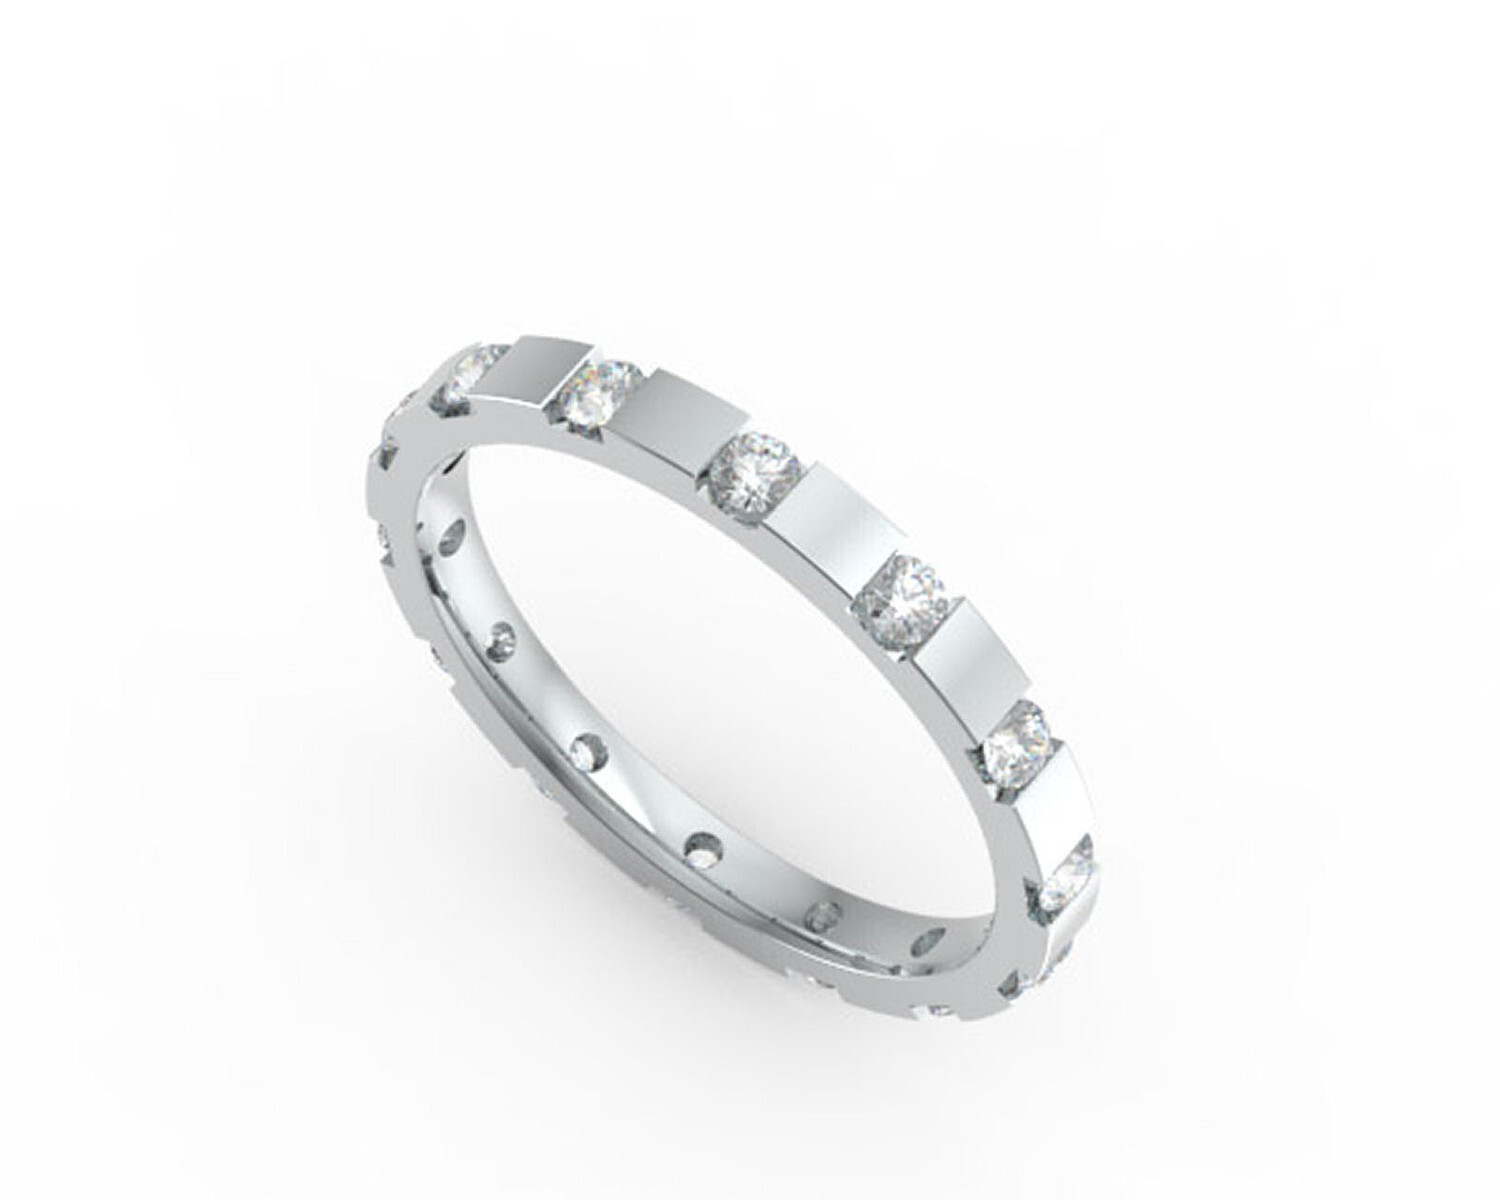 CWR01 Wedding Ring from Congenial Diamonds - hitched.co.uk